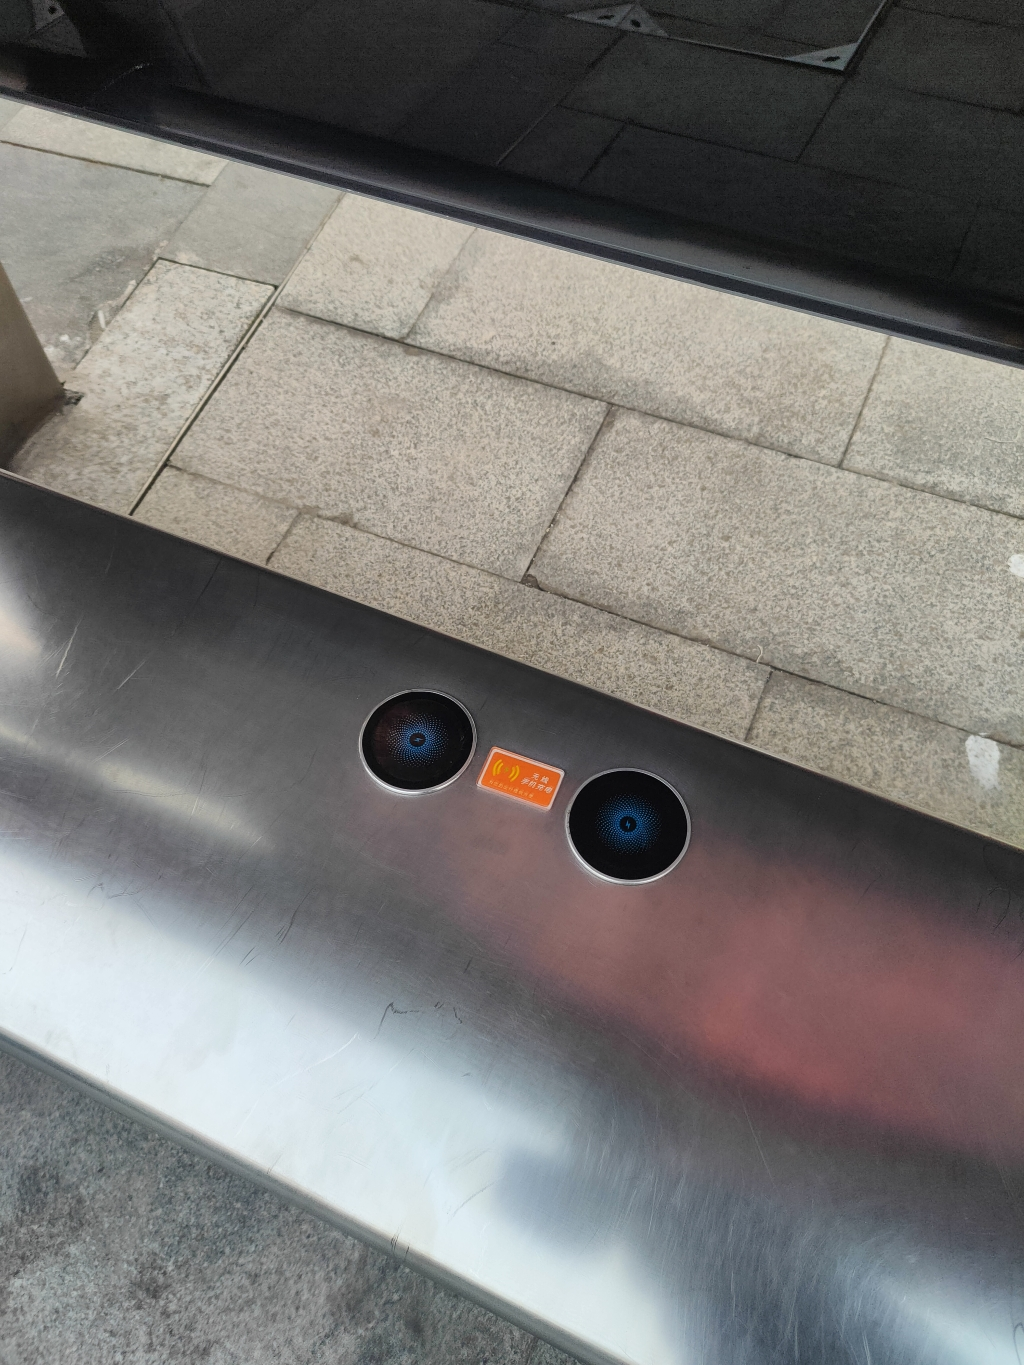 Wireless chargers installed on the seat making automatically charging possible as soon as the mobile phone is put on. (Photo provided by Chongqing City Transportation Development & Investment Group)